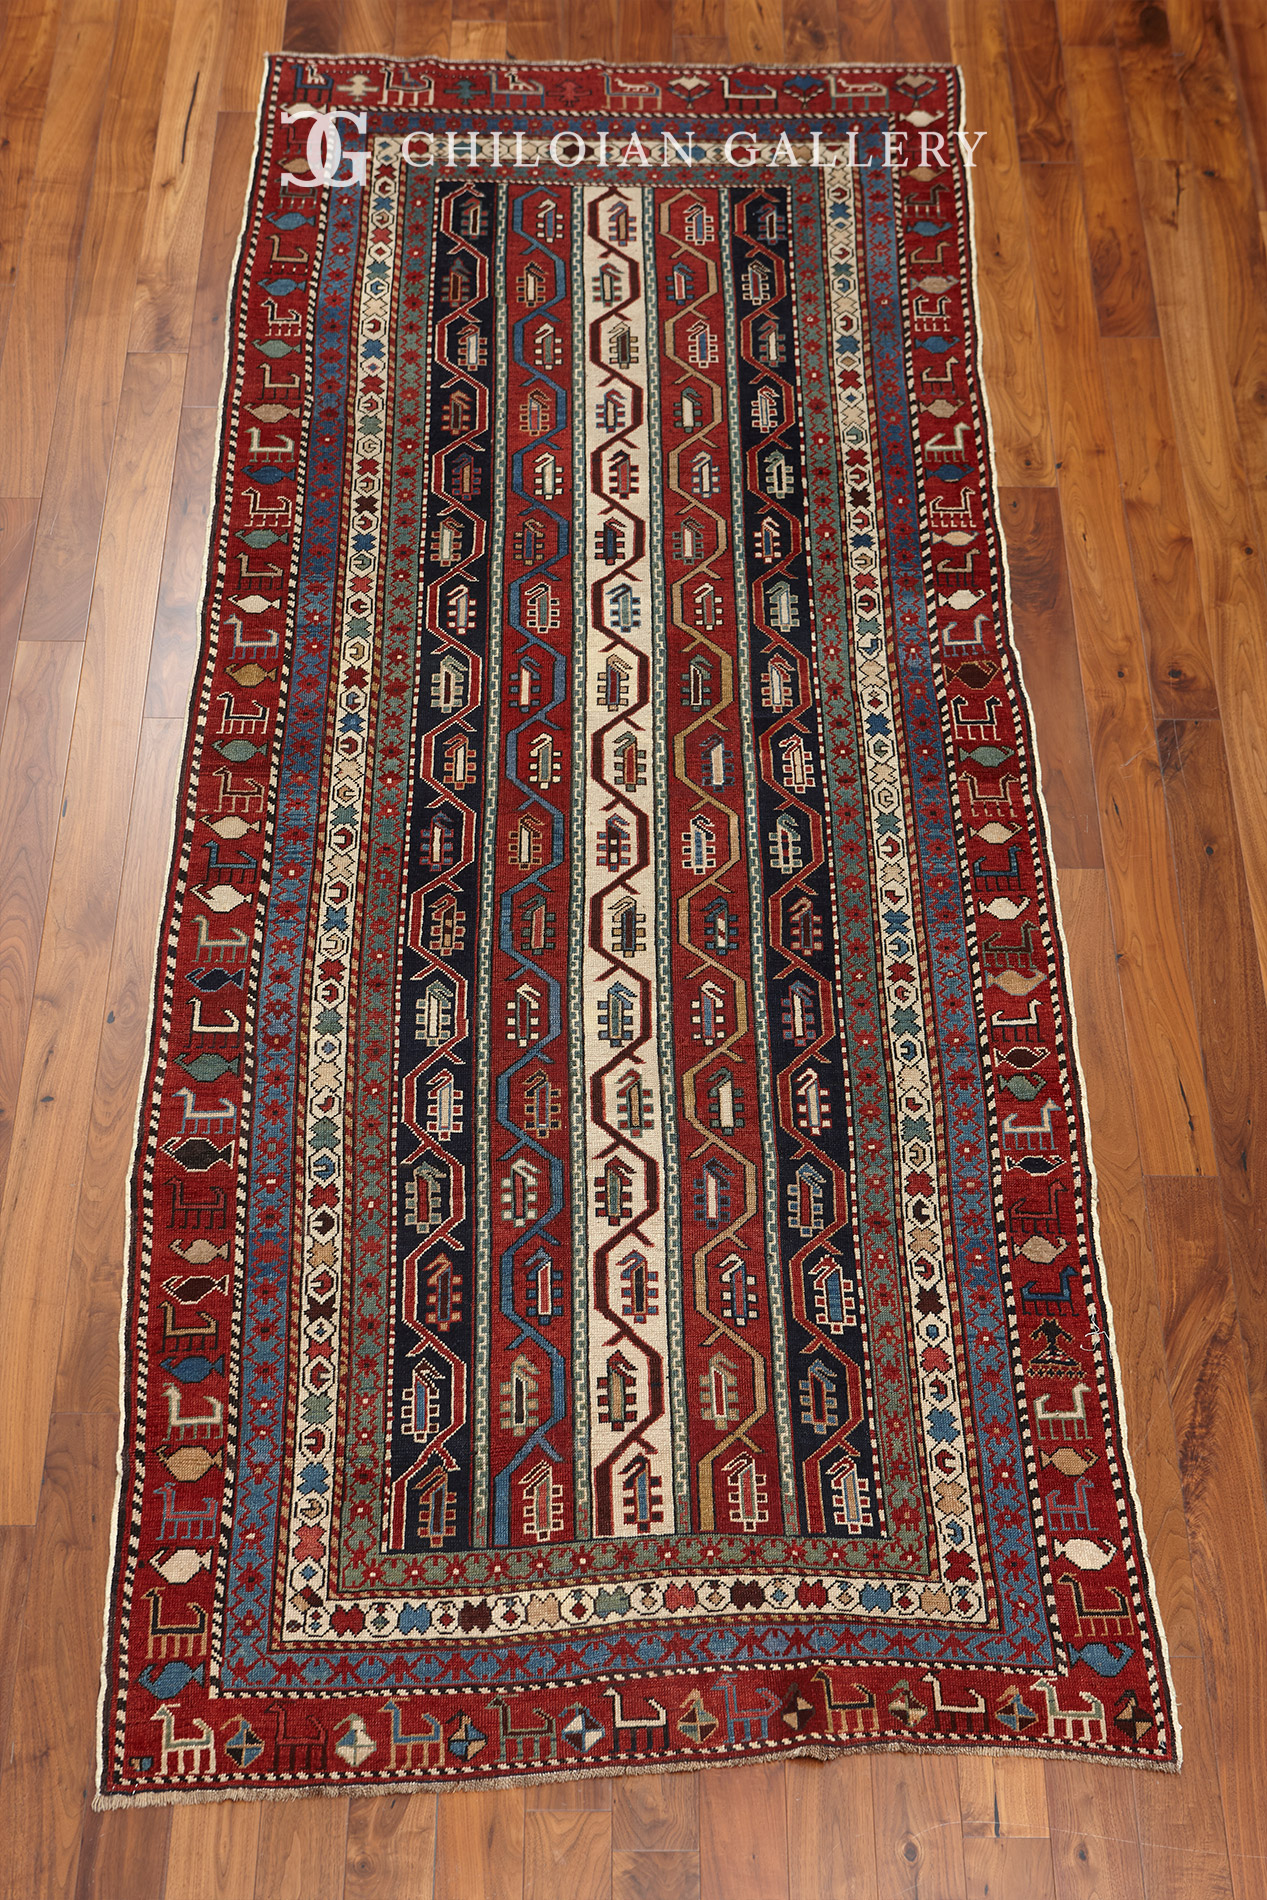 Shirvan Rug Chiloian Gallery Antique Rugs And Carpets